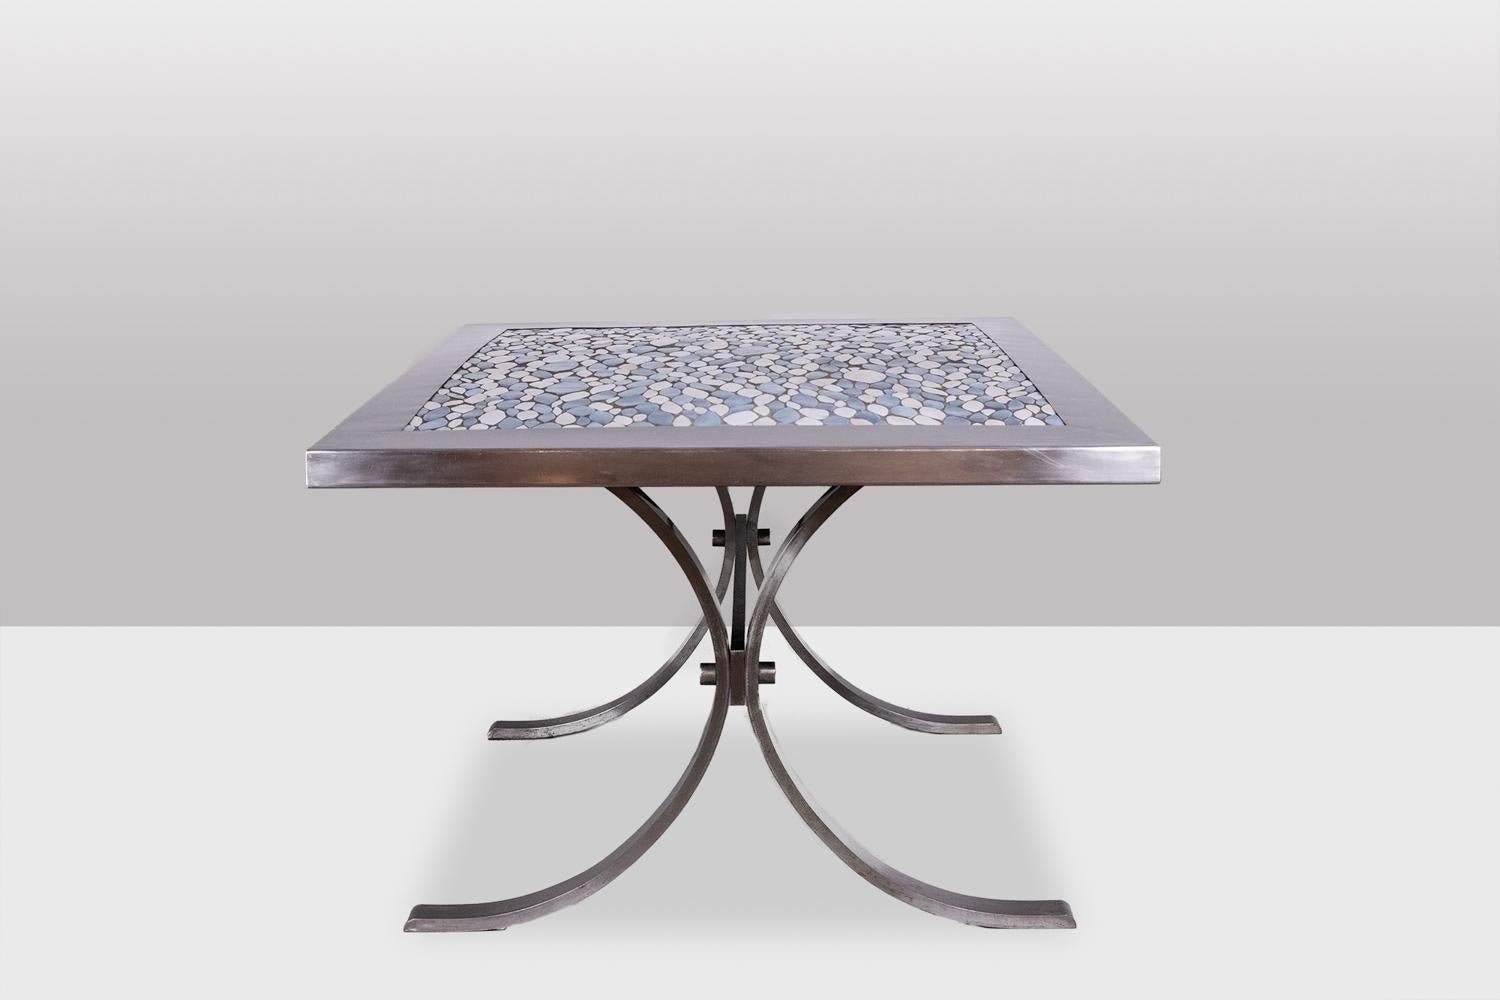 Dining room table in polished metal and ceramic with abstract blue and white decoration, rectangular in shape, the top resting on two curved legs.

French work realized in the 1970s.

Dimensions: H 74 x W 218 x D 48 cm

Reference: LS60113208H